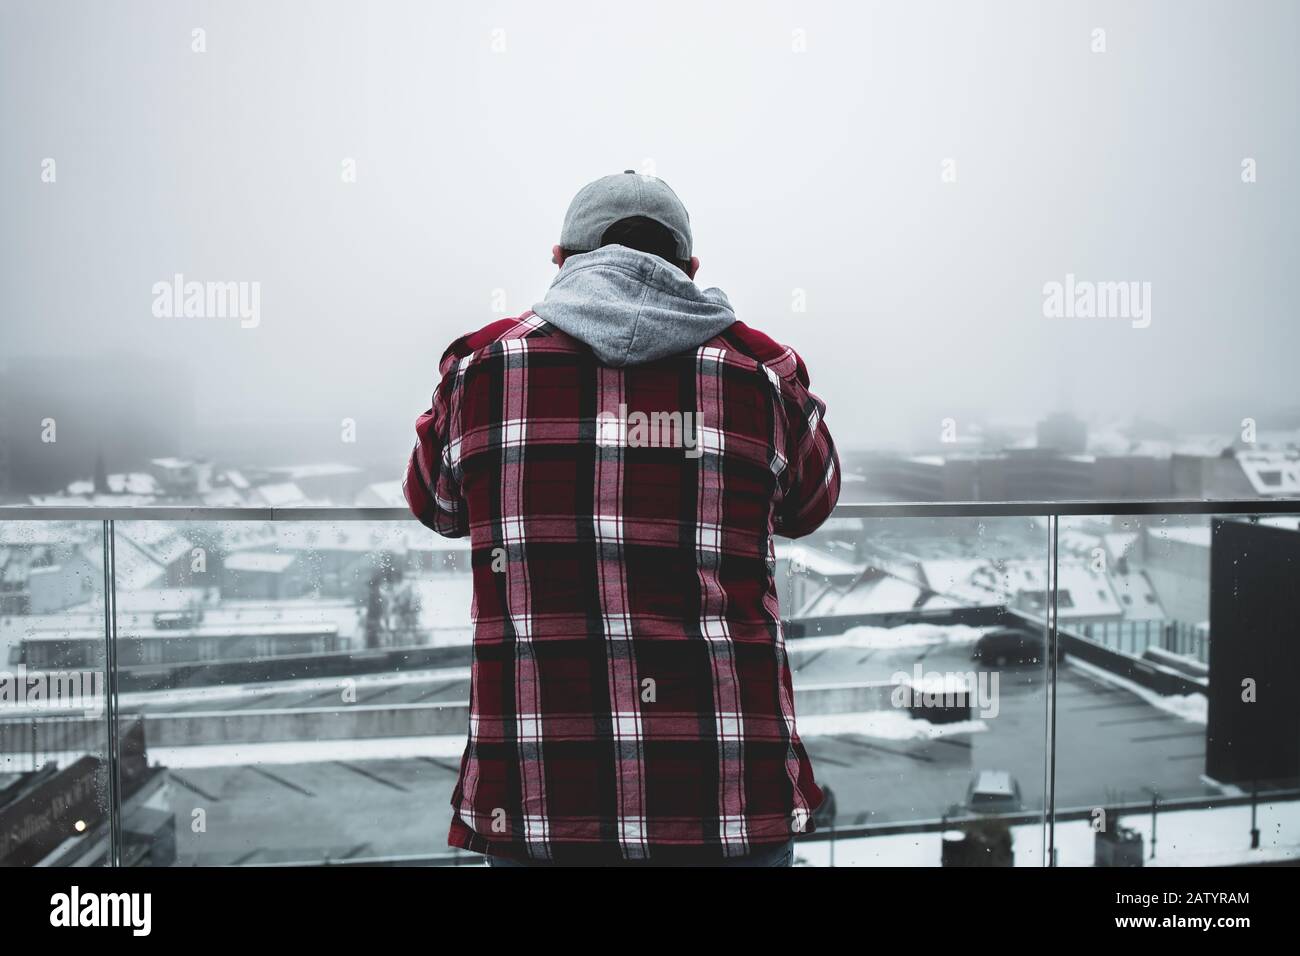 Man on a roof overlooking city in foggy weather Stock Photo